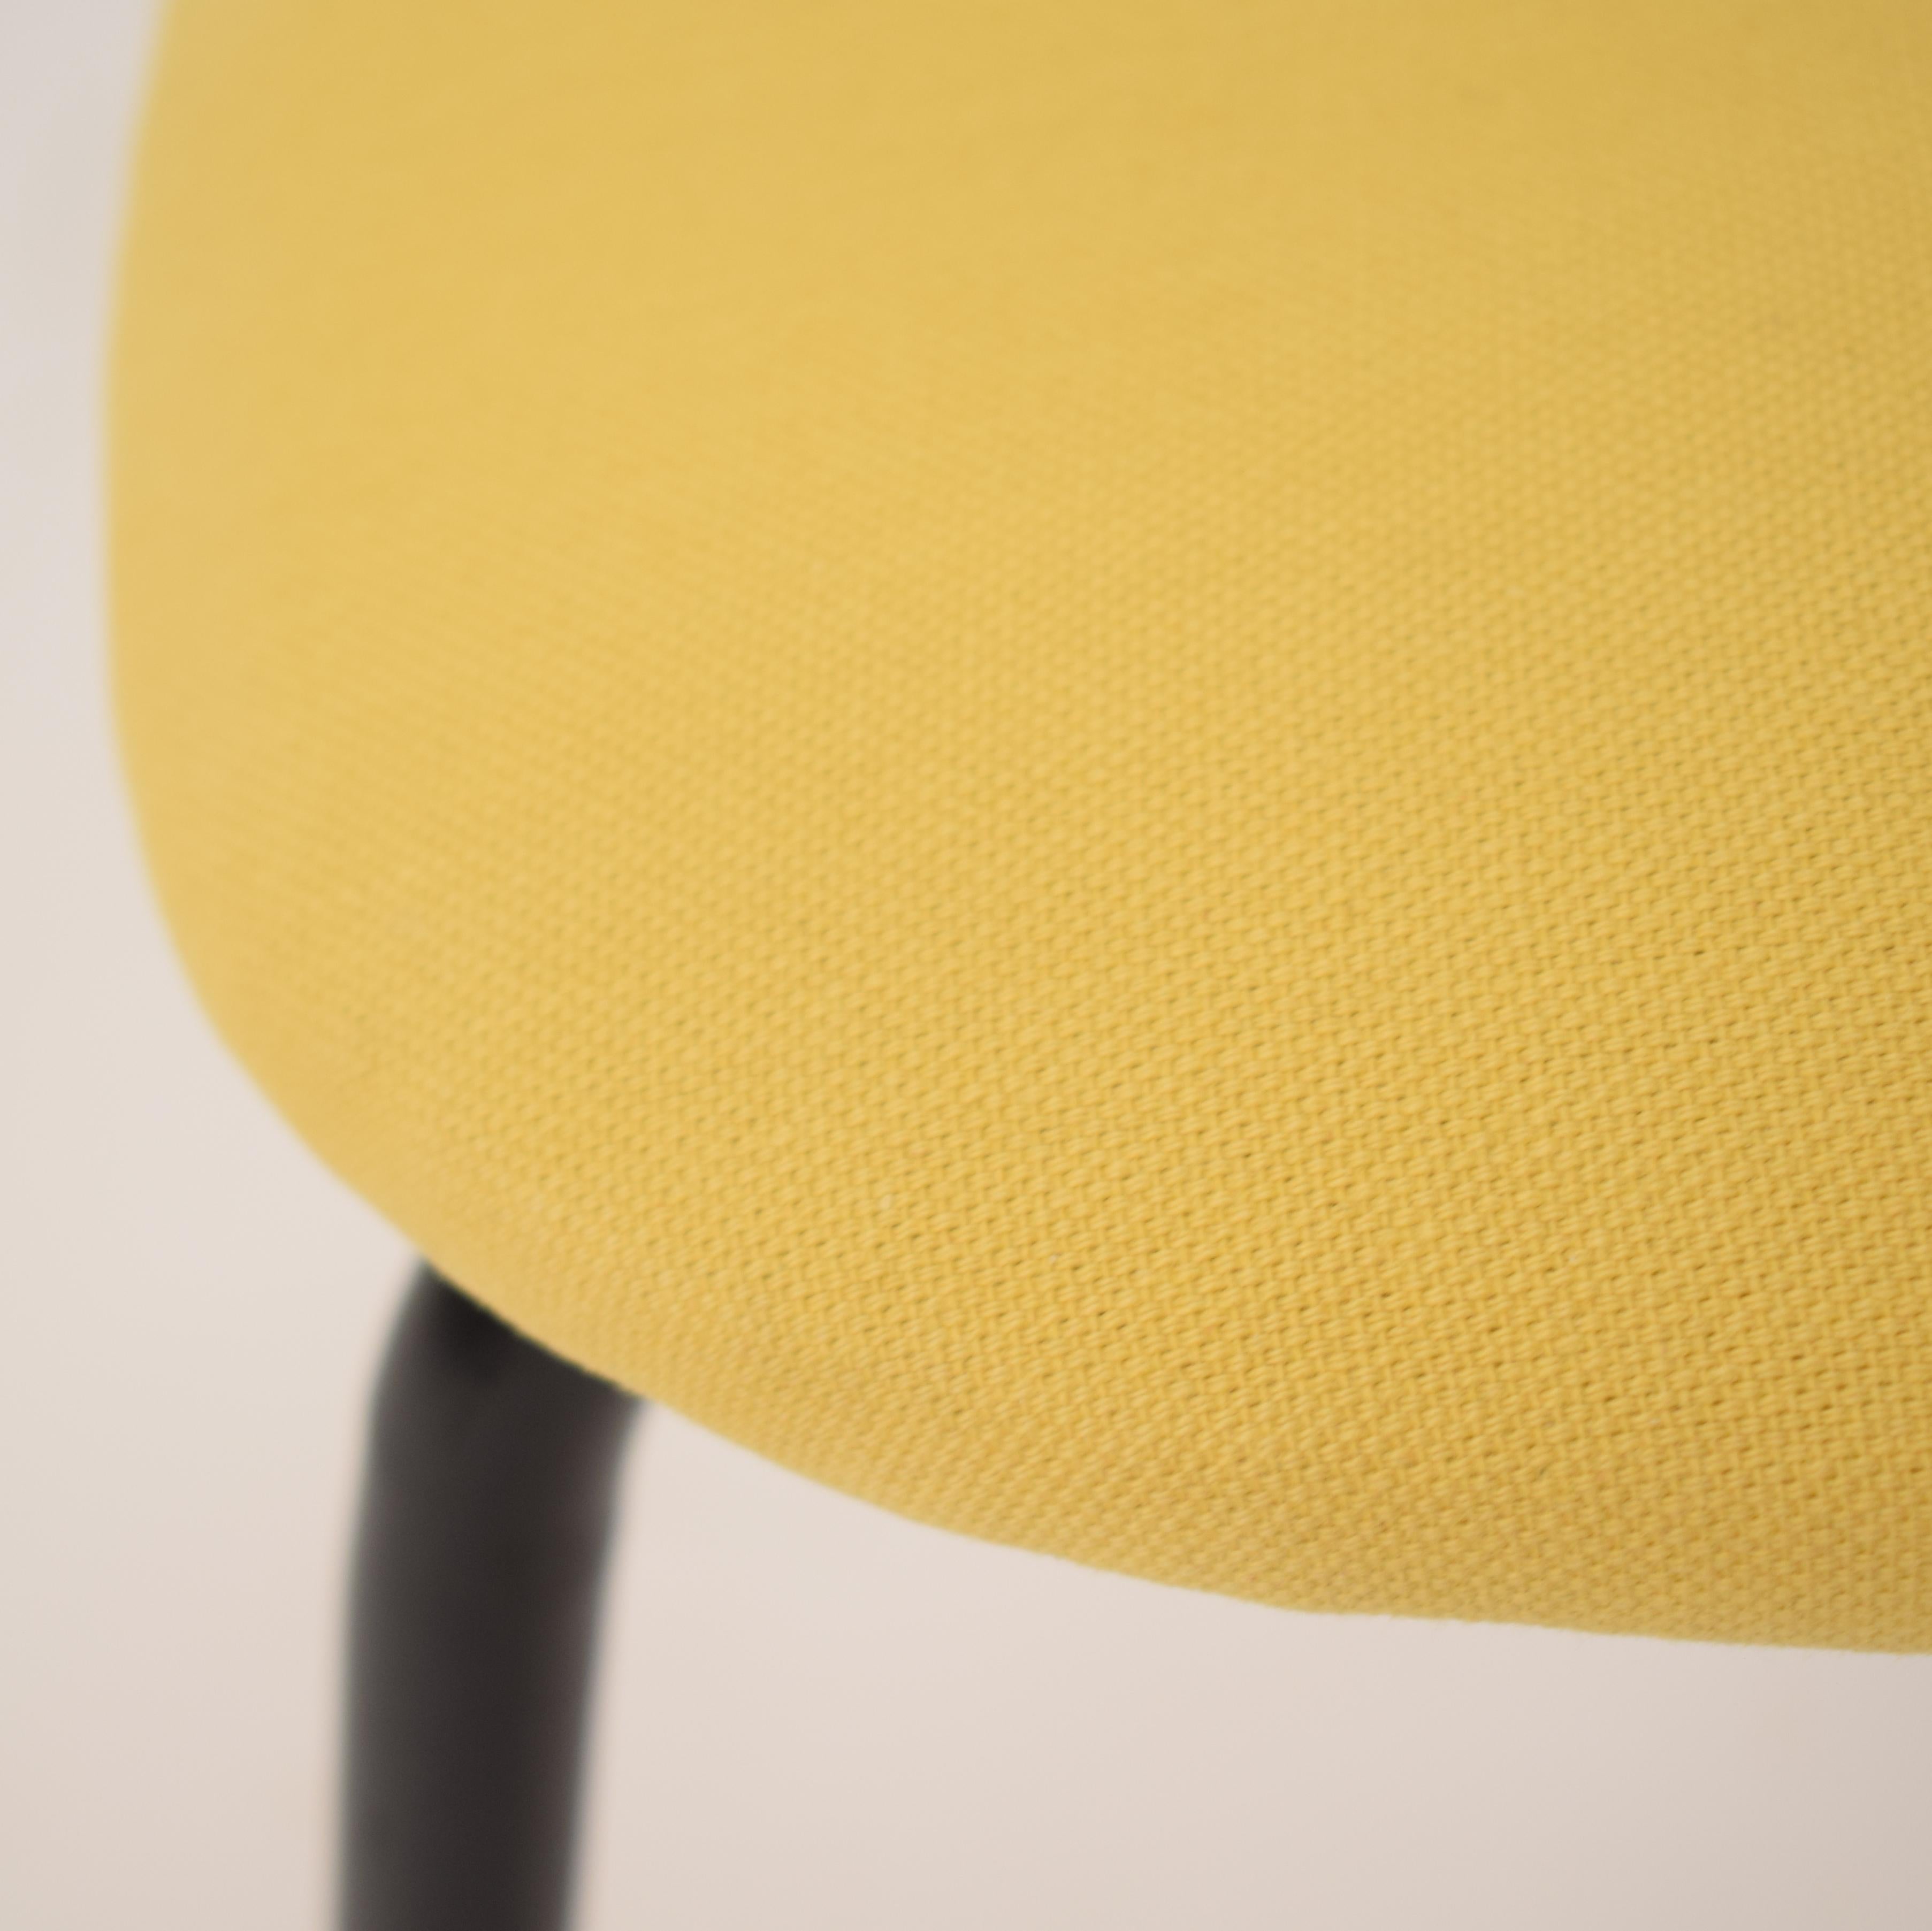 Midcentury Italian Black and Yellow Dining Chairs Attributed to Ico Parisi, 1958 1